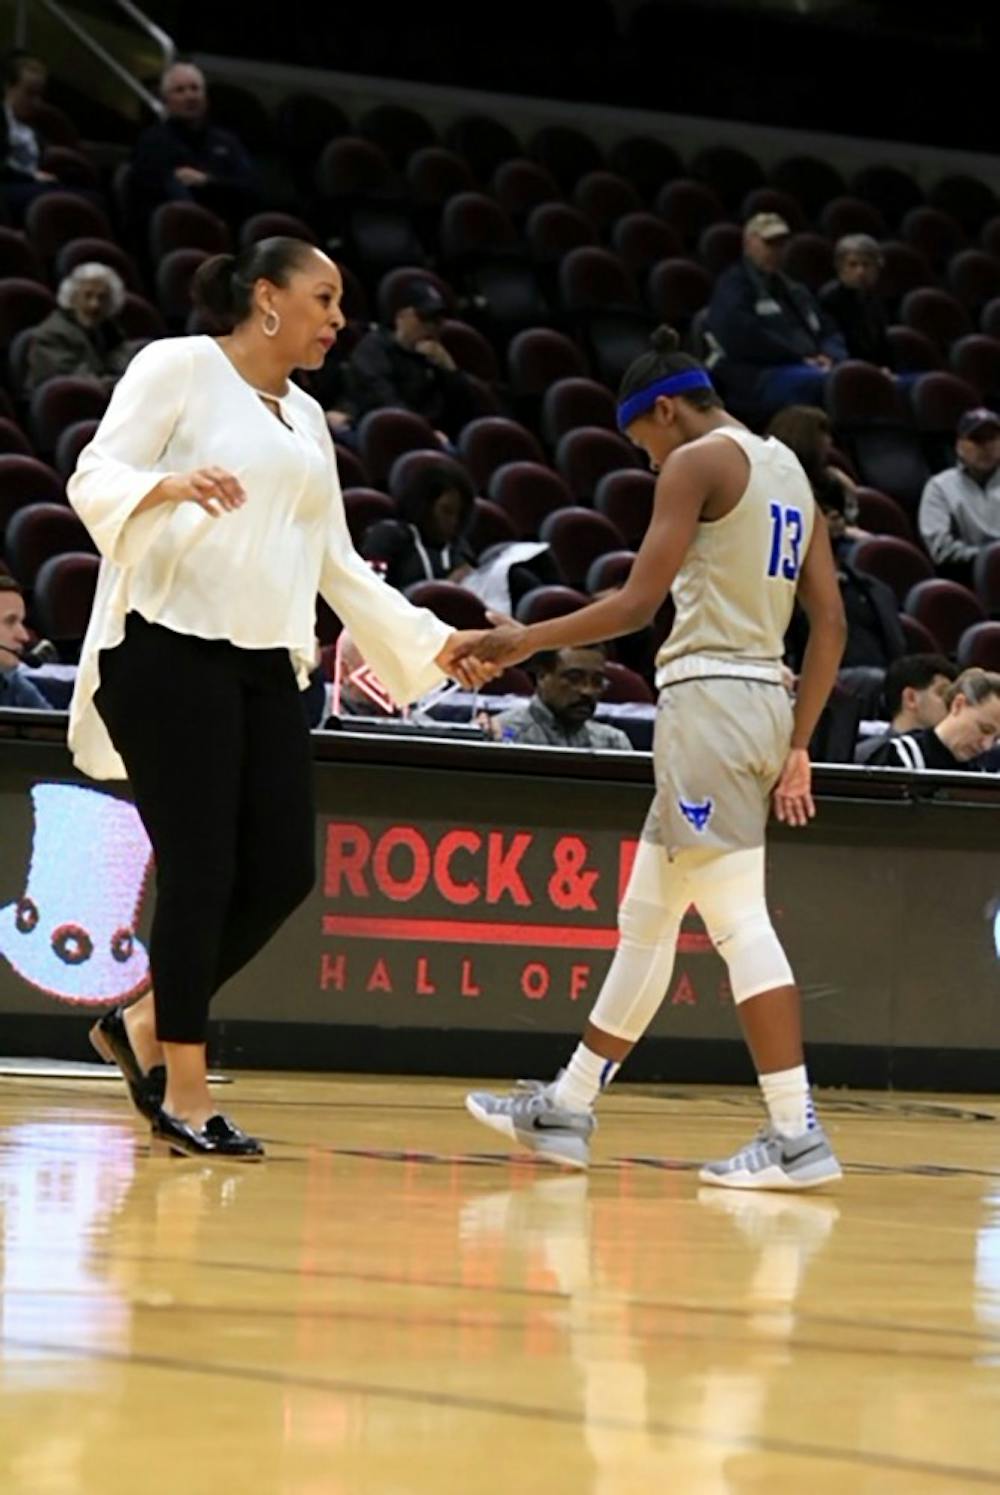 <p>Junior guard Autumn Jones walks to the bench as head coach Felisha Legette-Jack gives her a handshake. The Bulls are playing the Southern Florida Bulls on Saturday at 1:15 p.m. in the first round of the NCAA Tournament.</p>